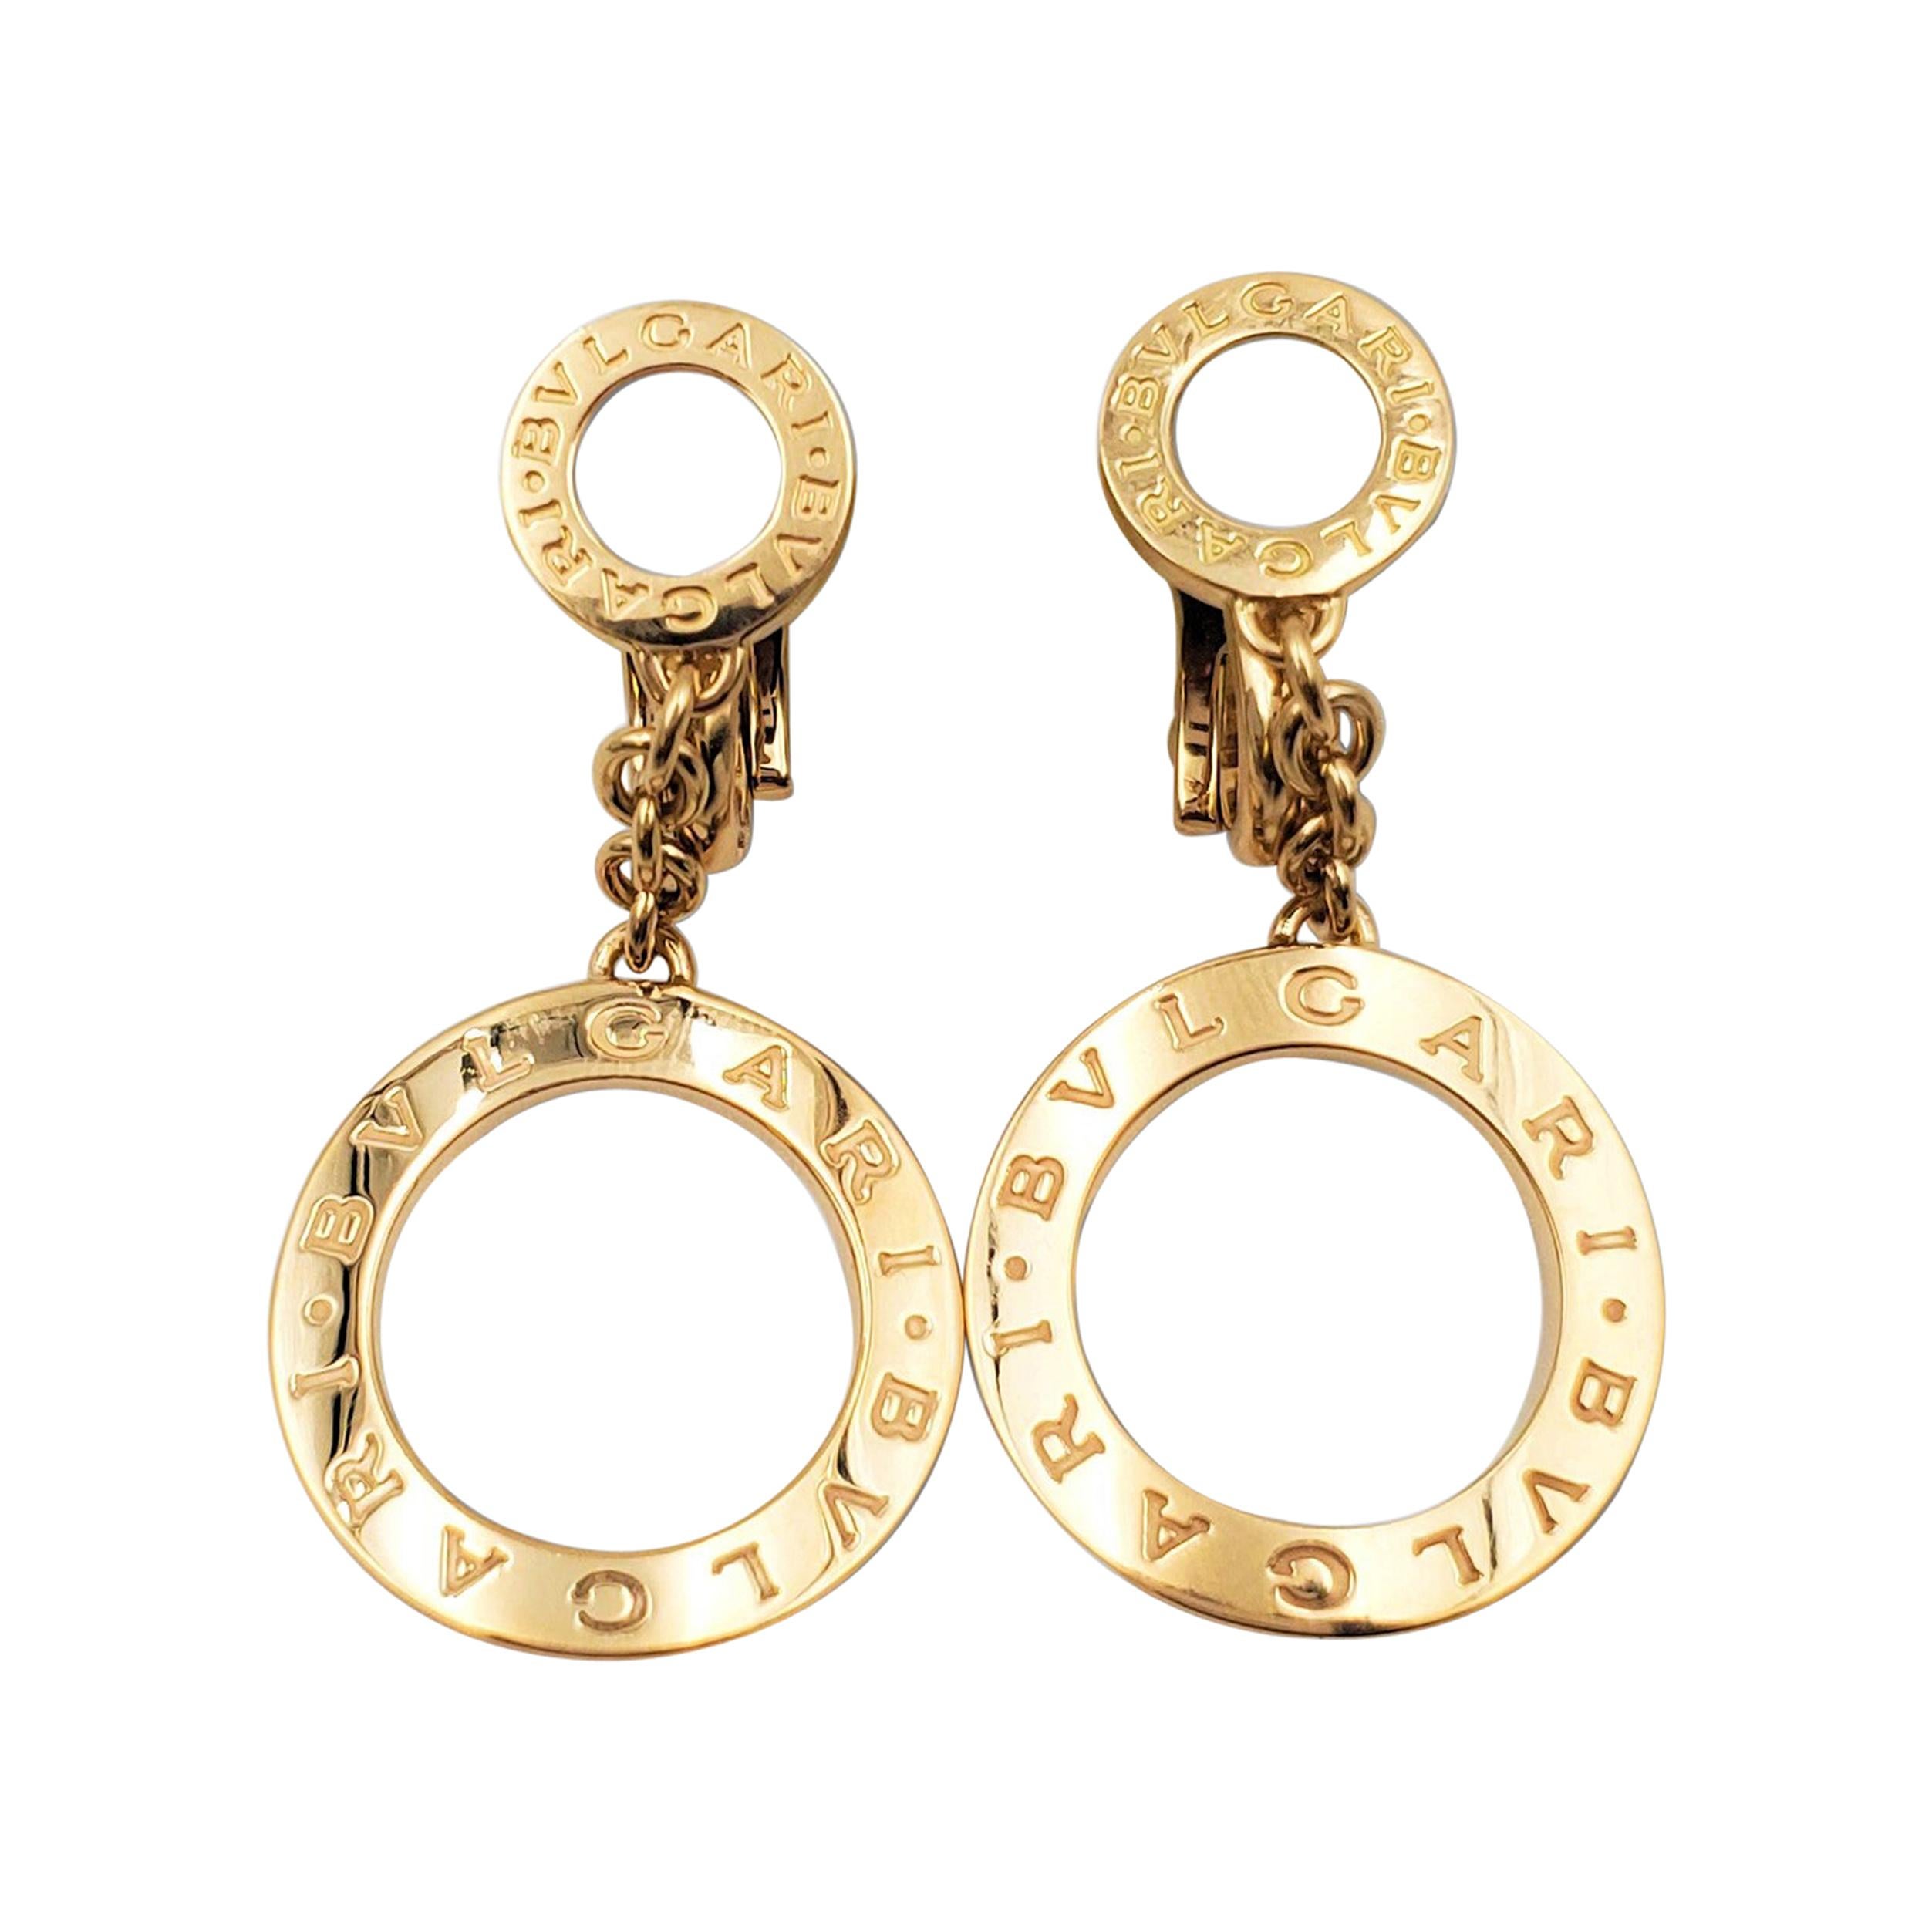 Bvlgari 'Reva' Yellow Gold and Mother-of-Pearl Open Disc Drop Earrings